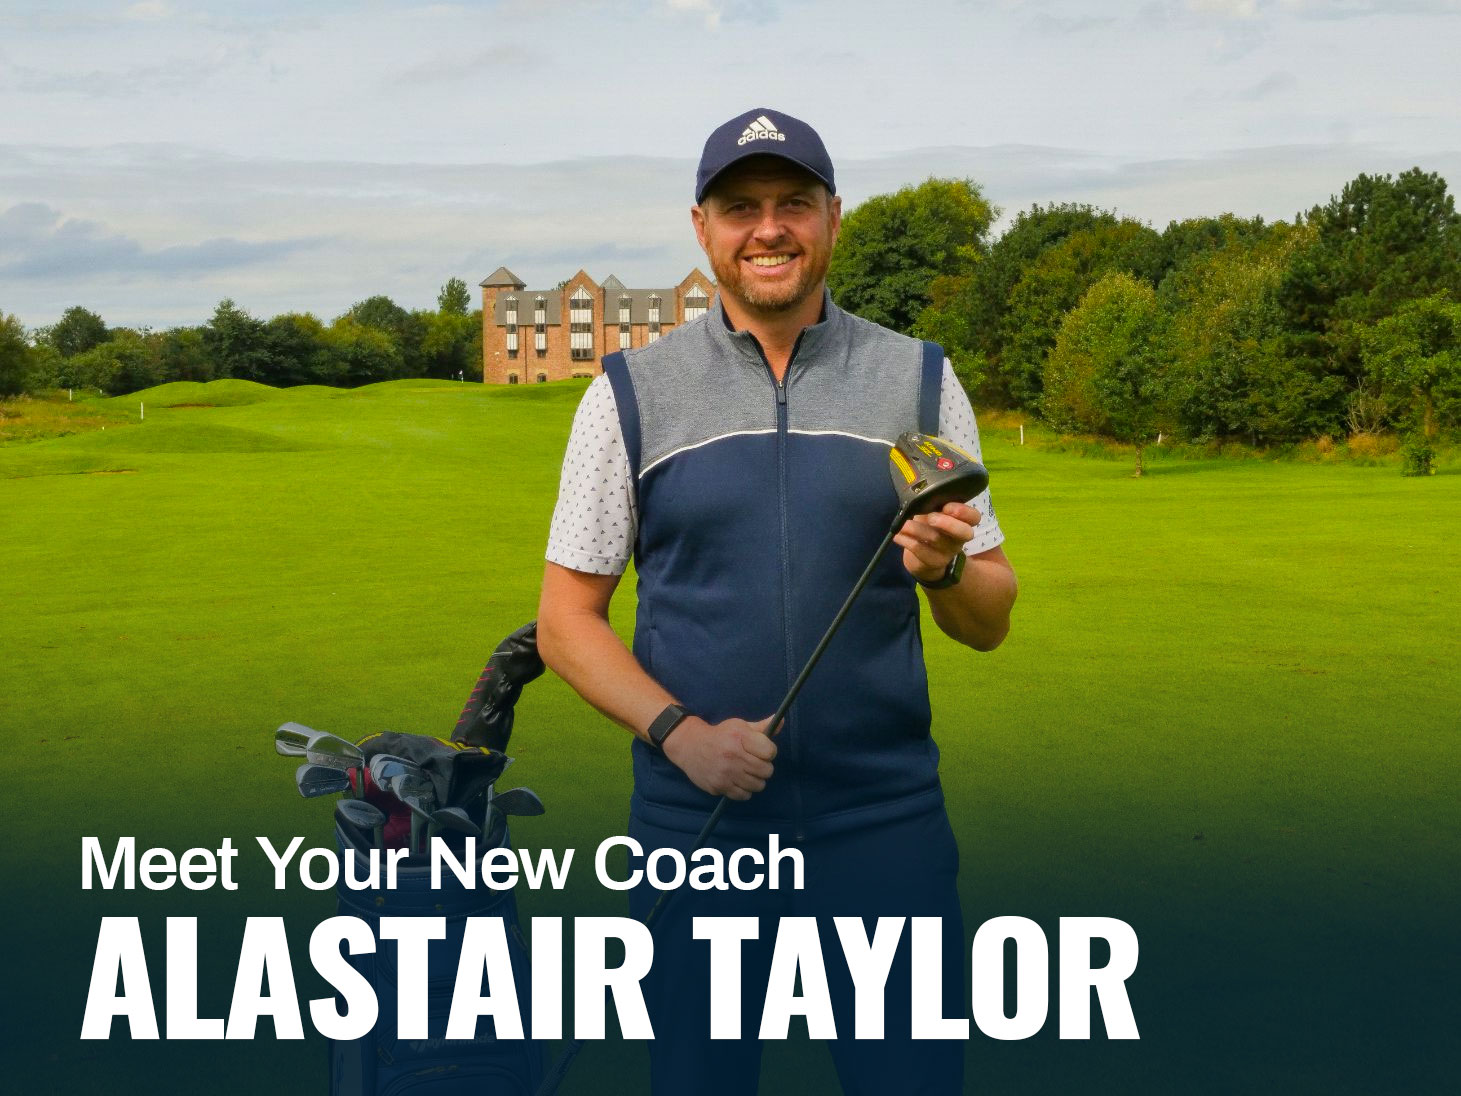 Ali Taylor Golf Online Golf Lessons, Coaching and Drills